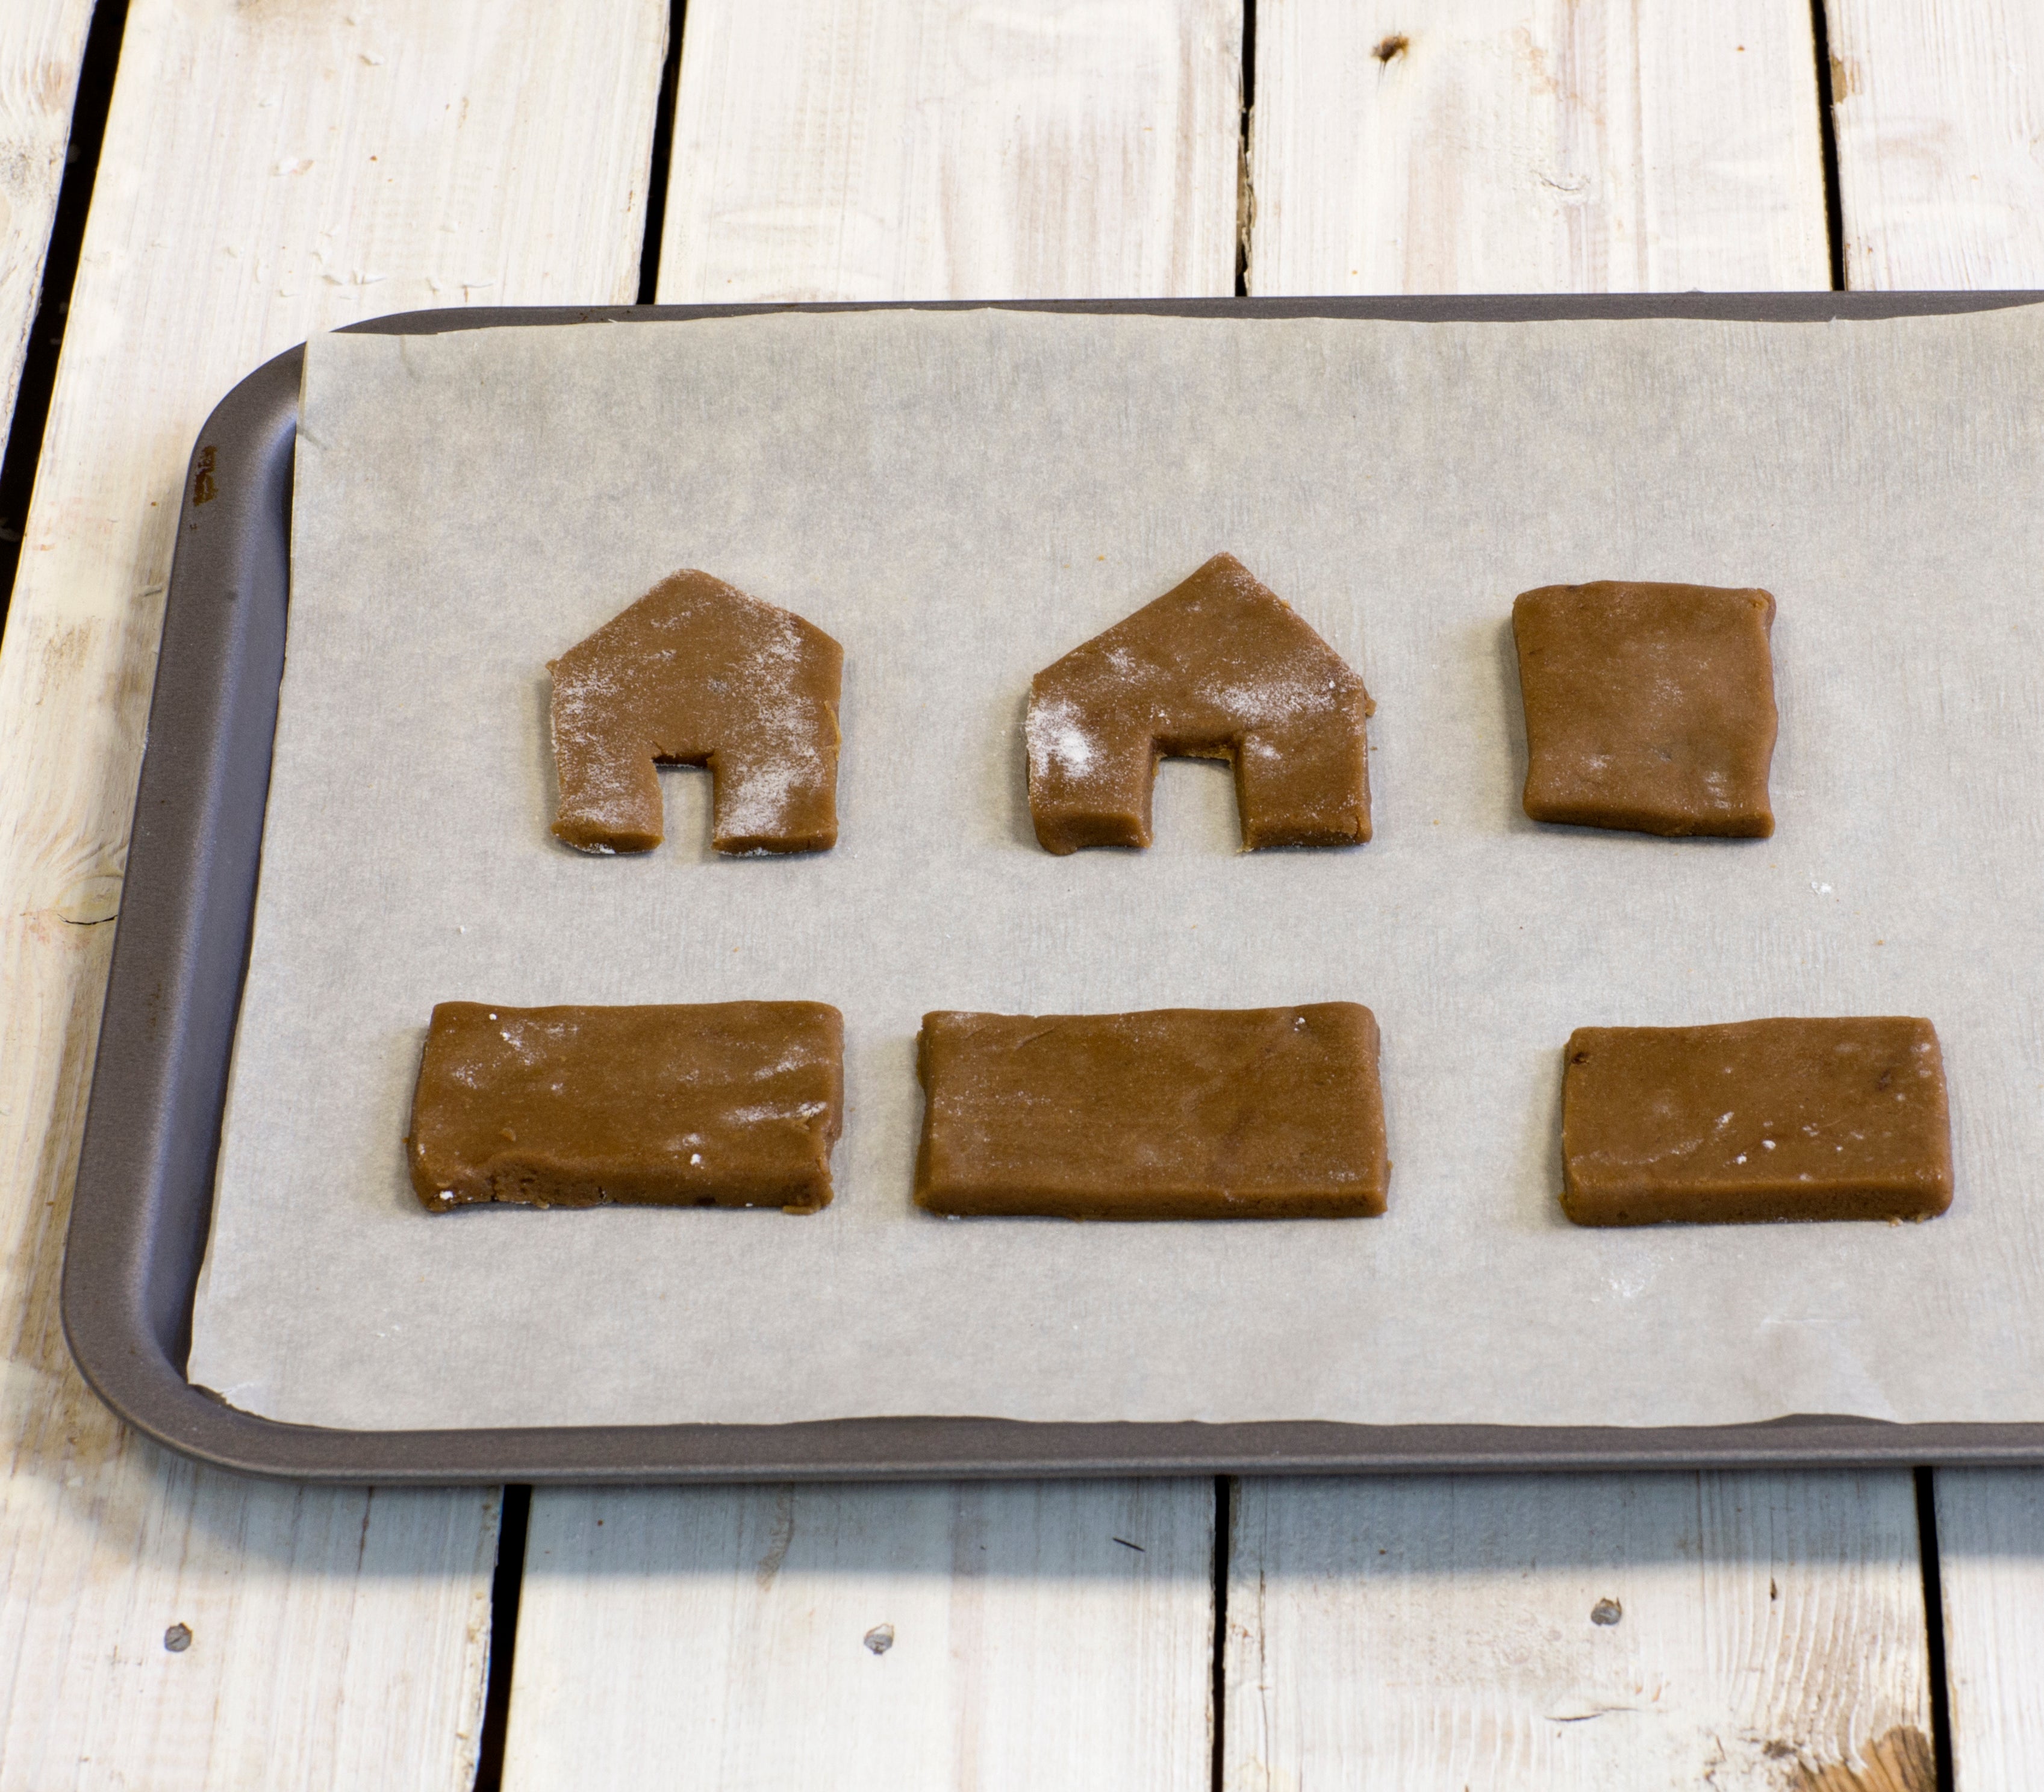 Gingerbread dough shapes laid out on baking tray